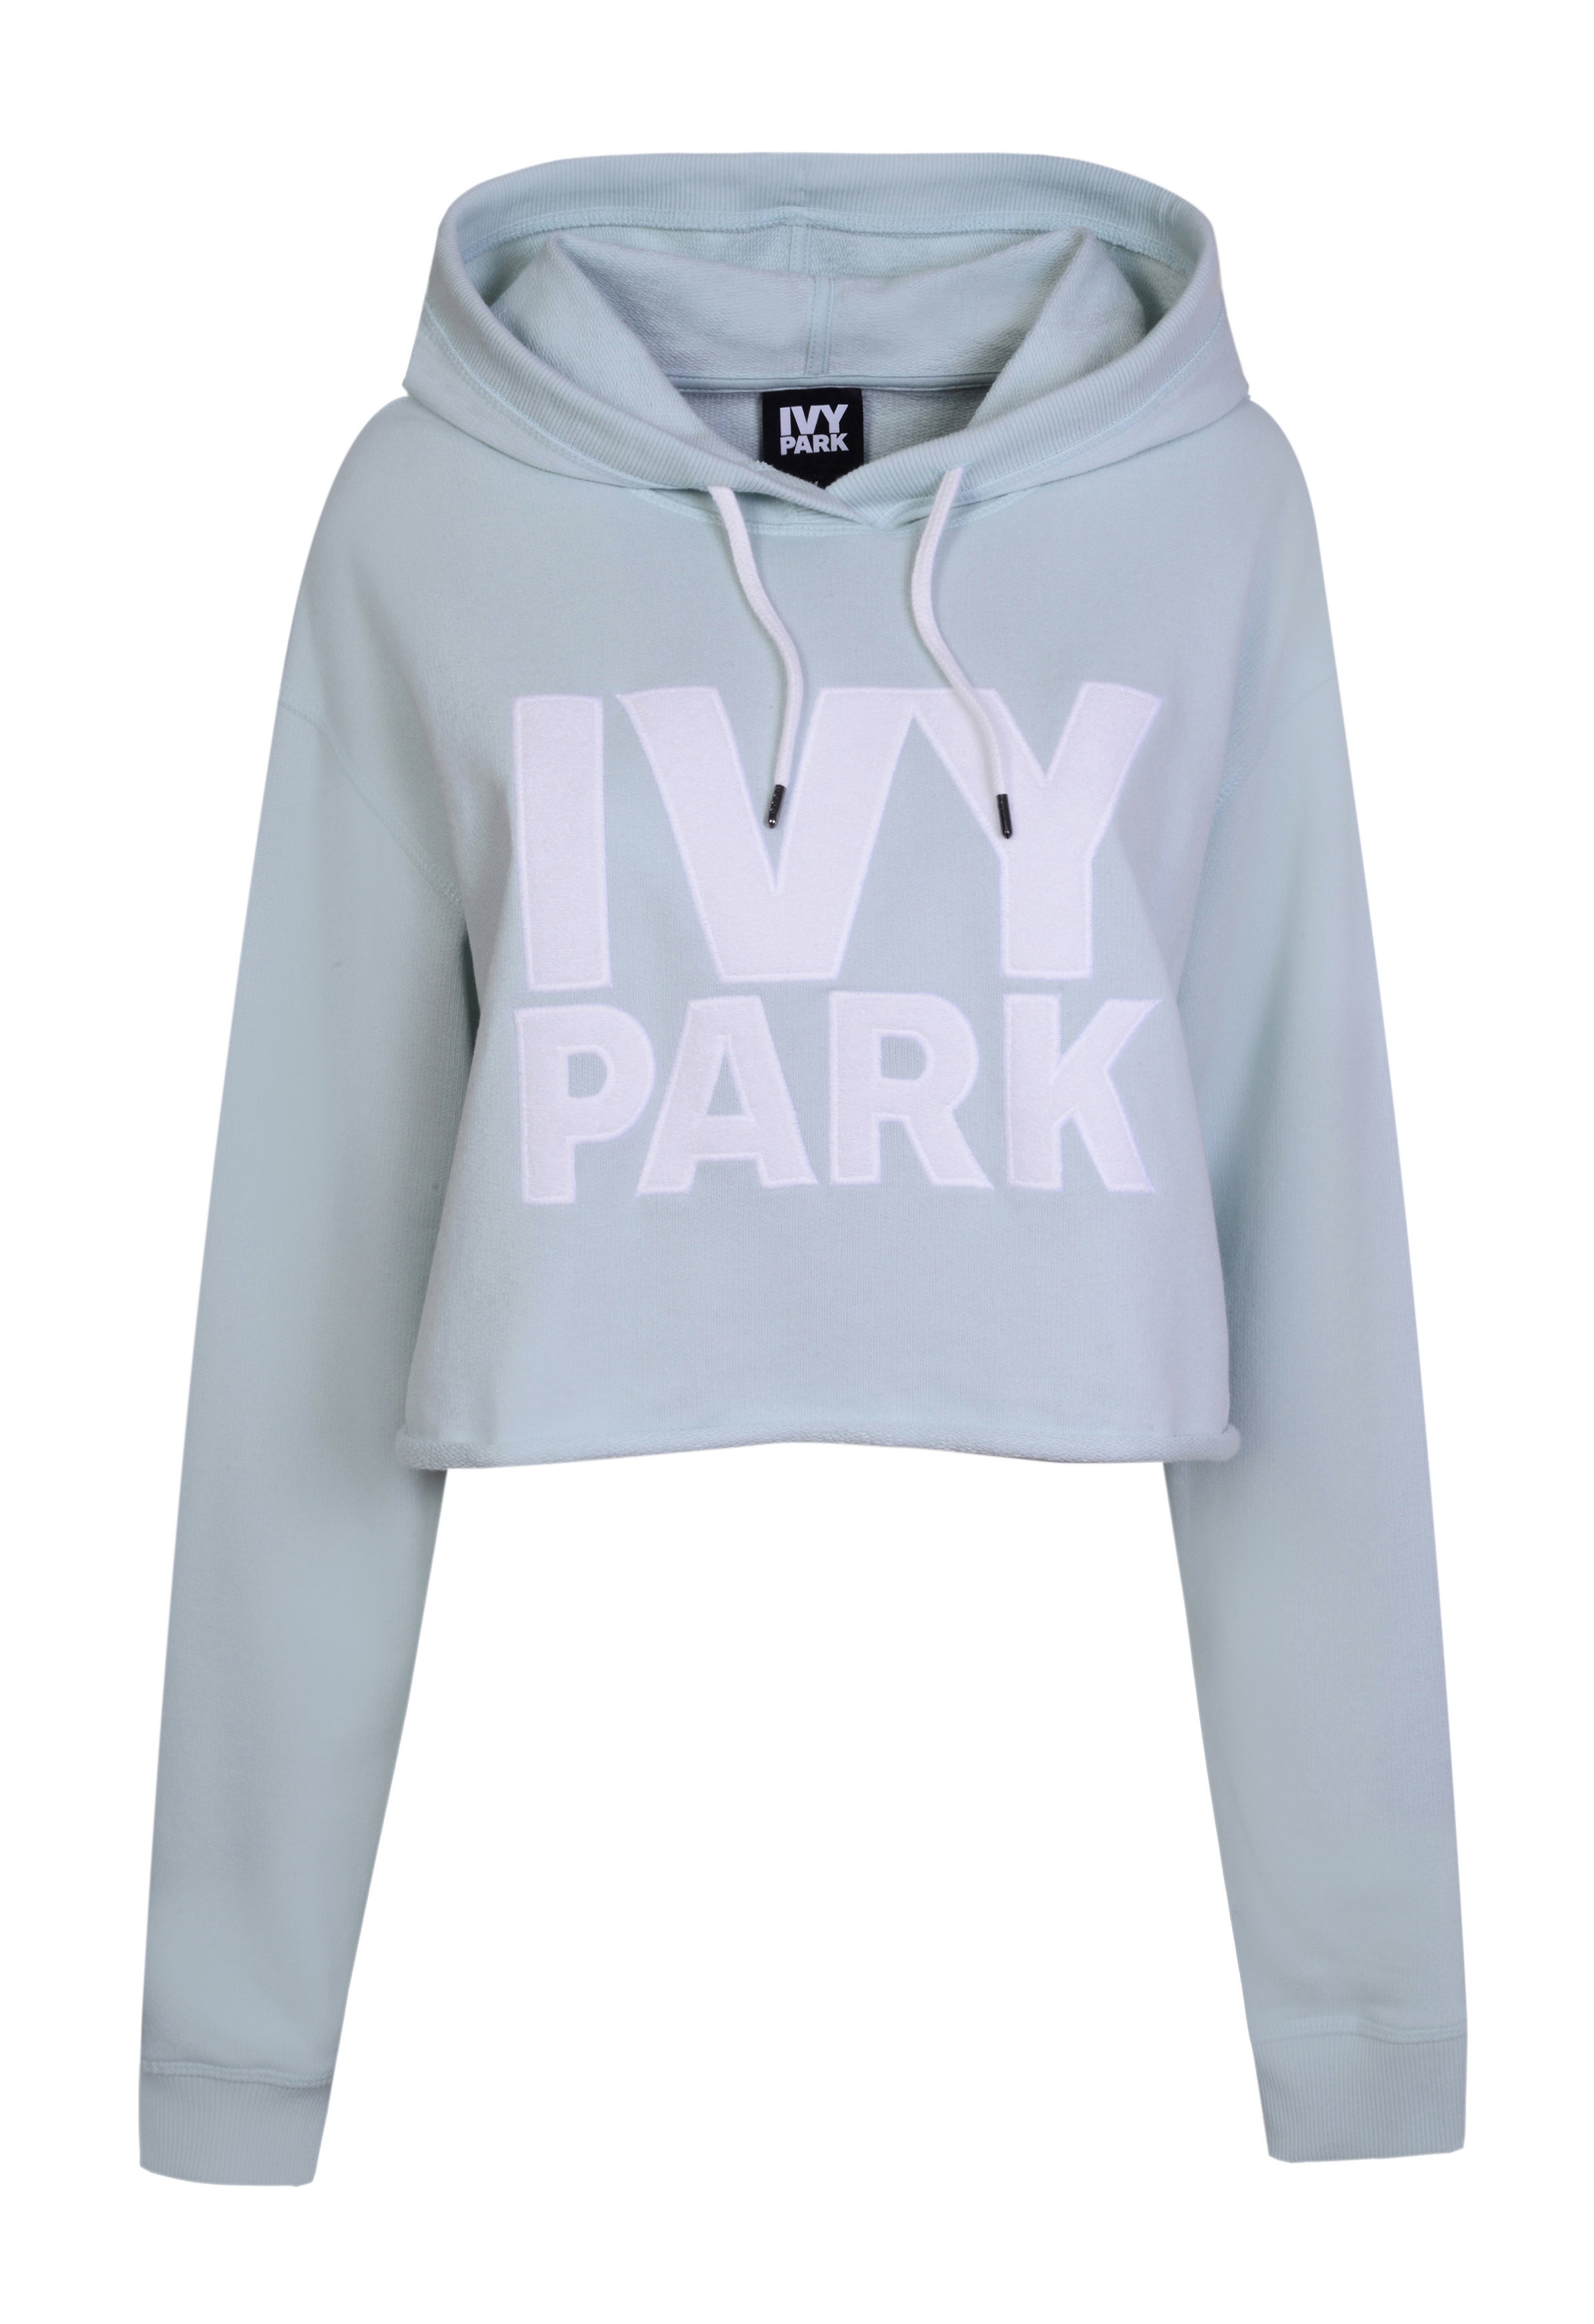 See the New Looks From Beyonce's IVY PARK Activewear Collection
